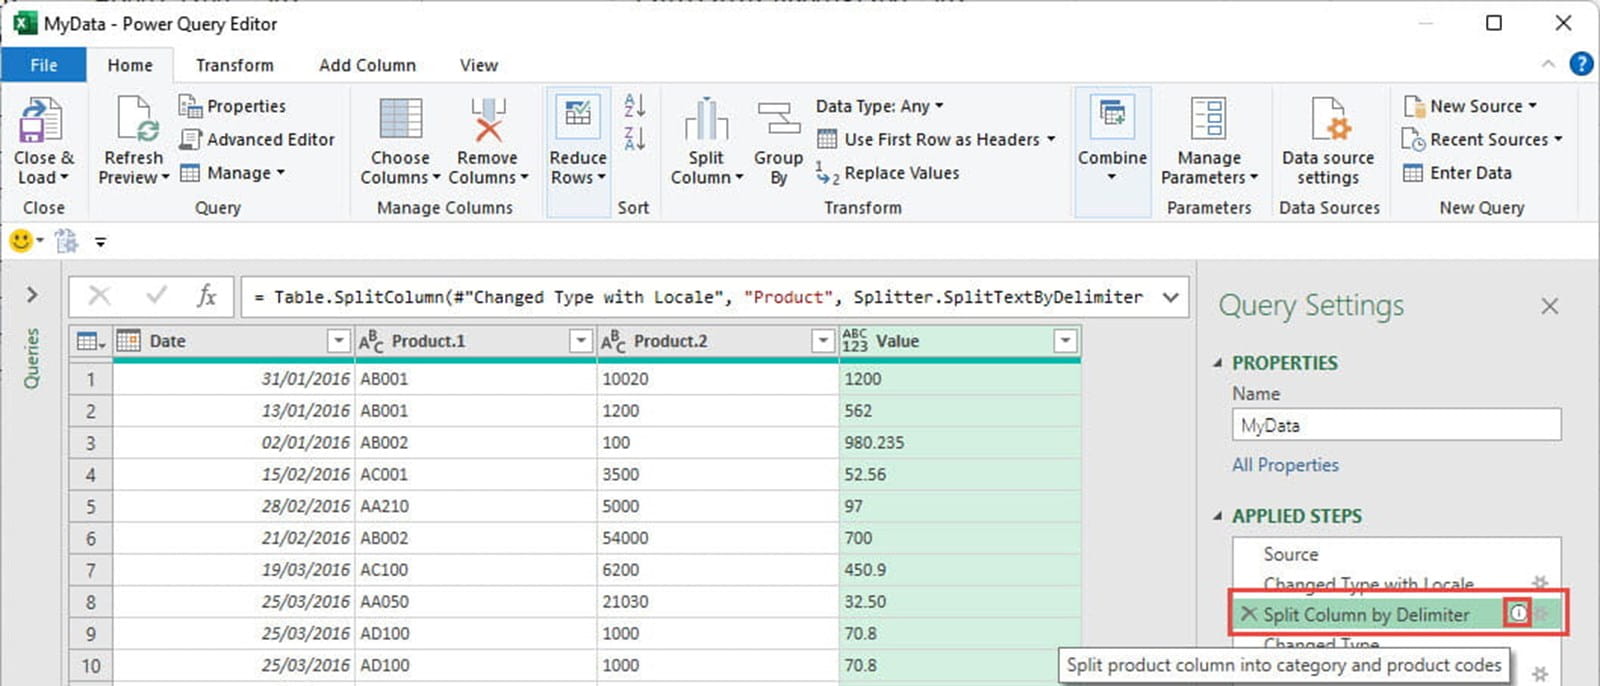 Screen shot 2 for the power query article